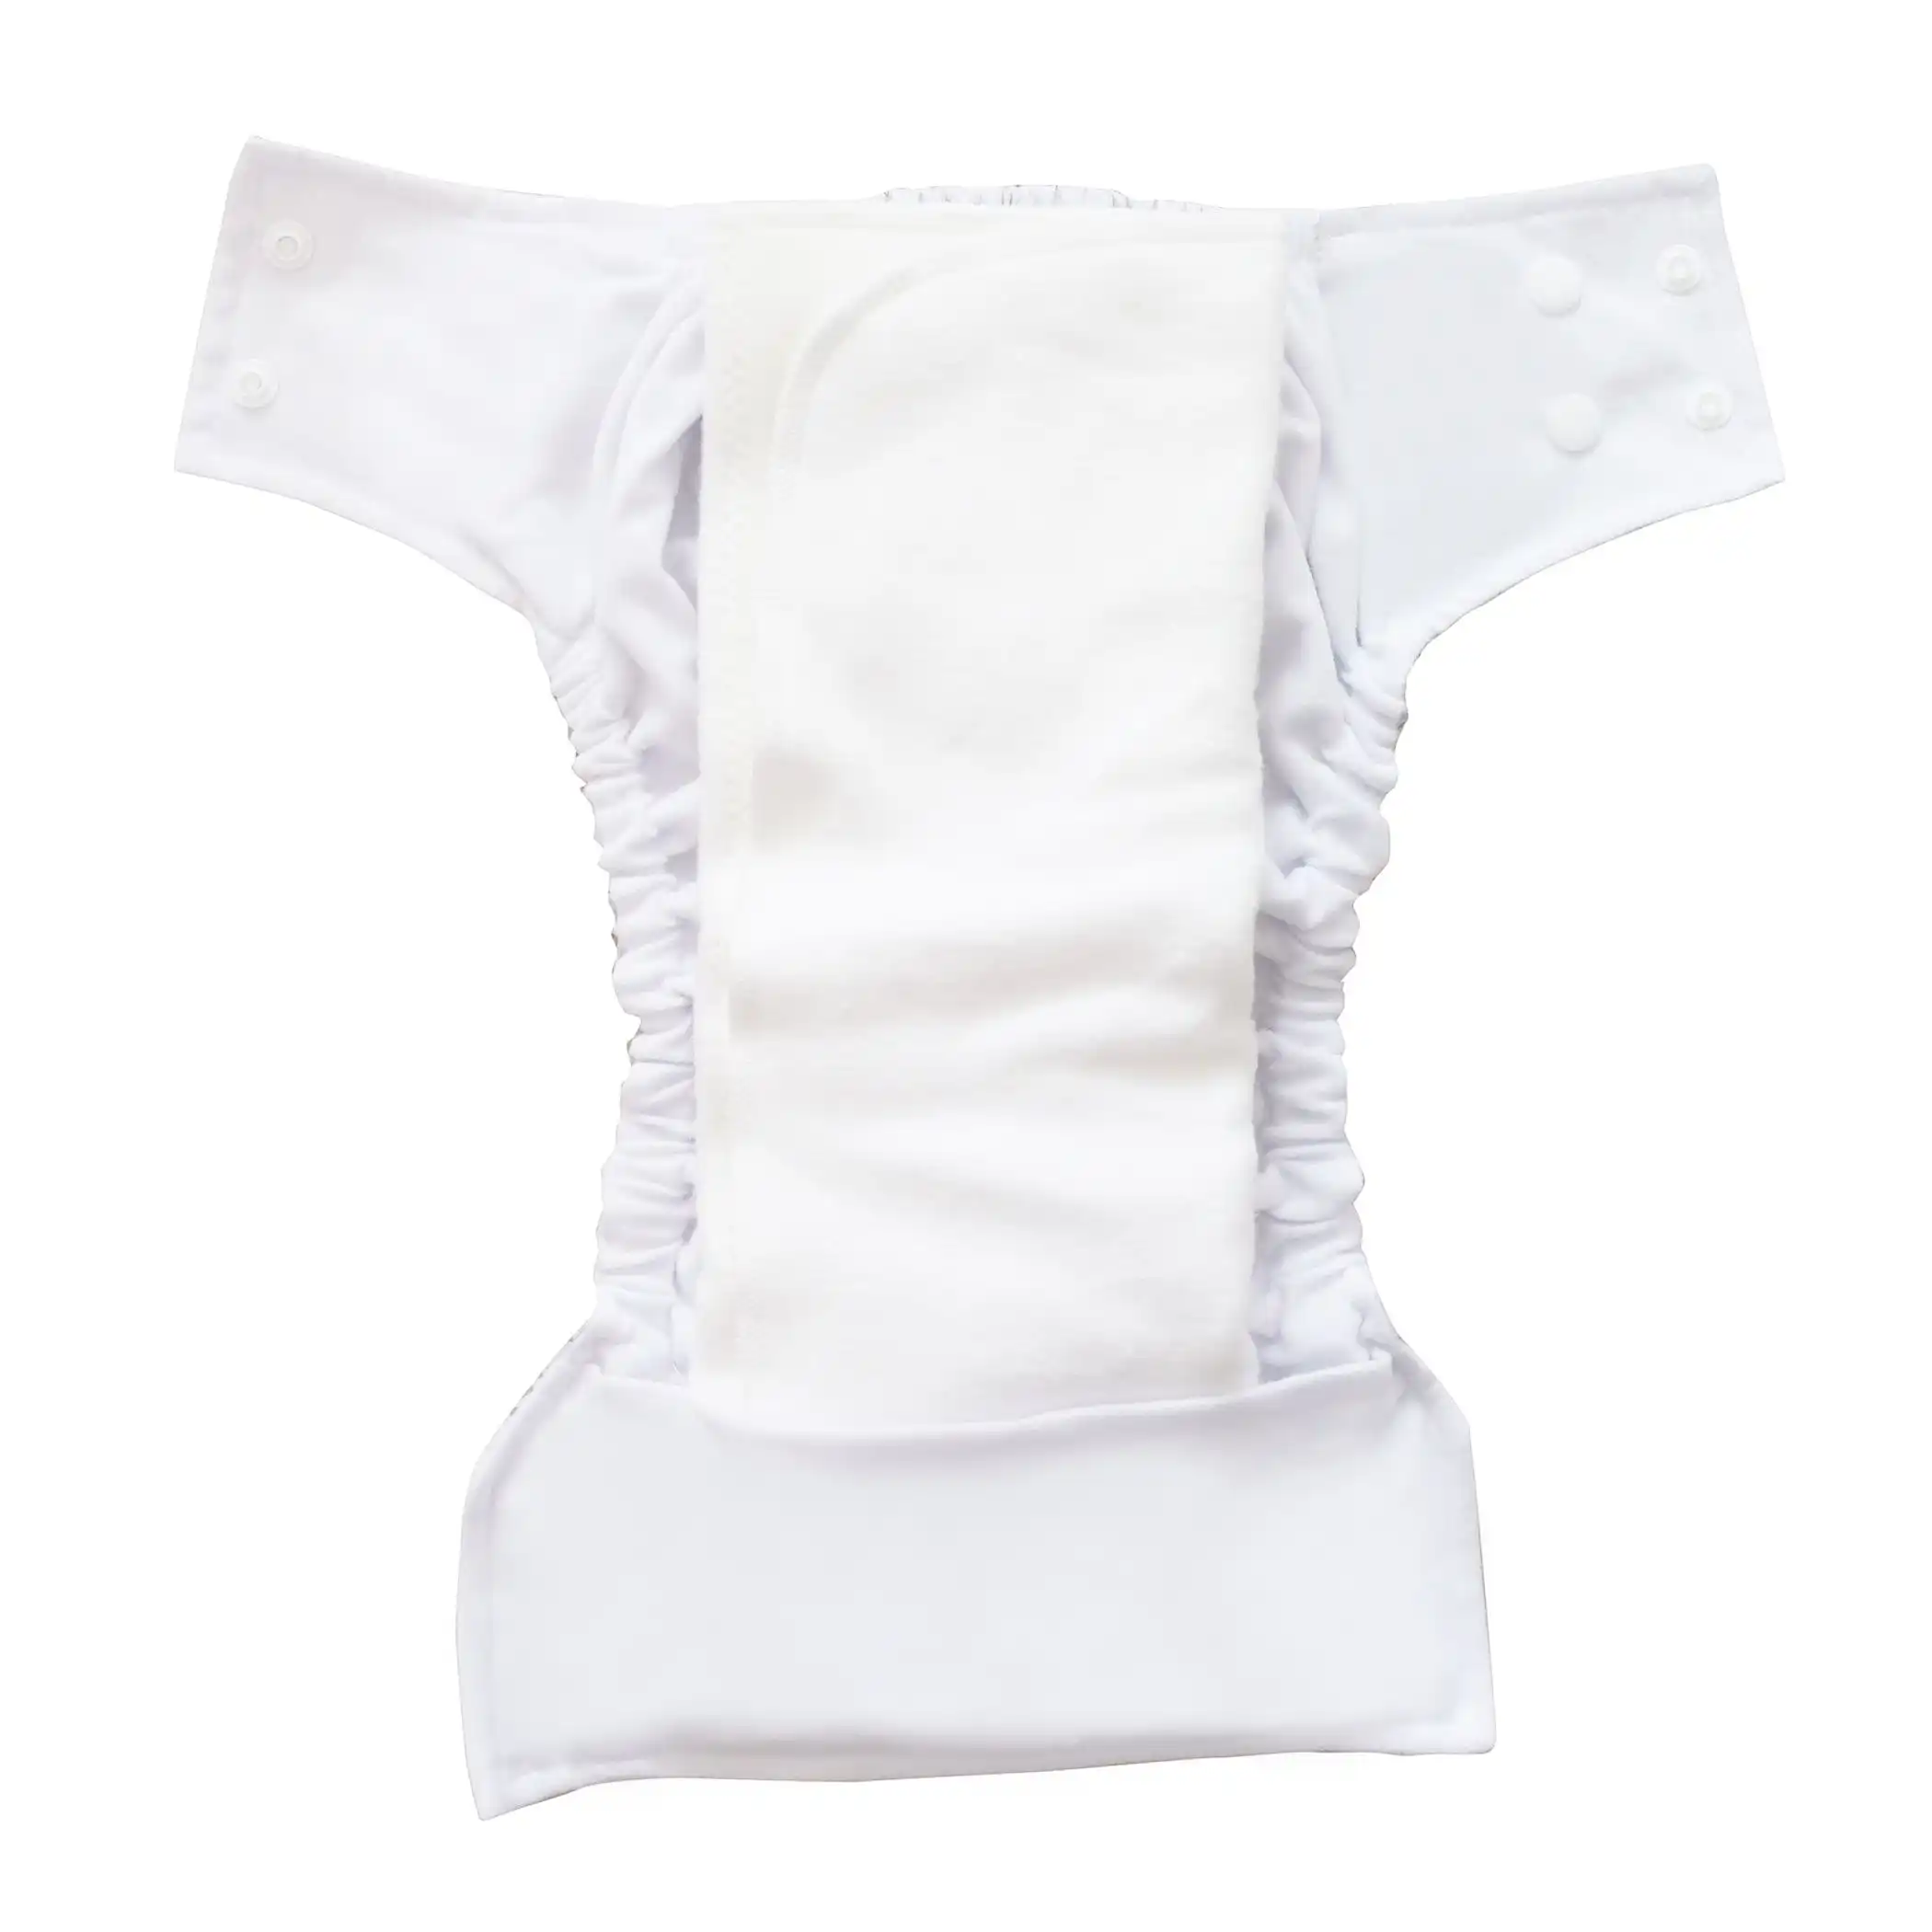 Plum Cloth Nappy & Bamboo Liner Space